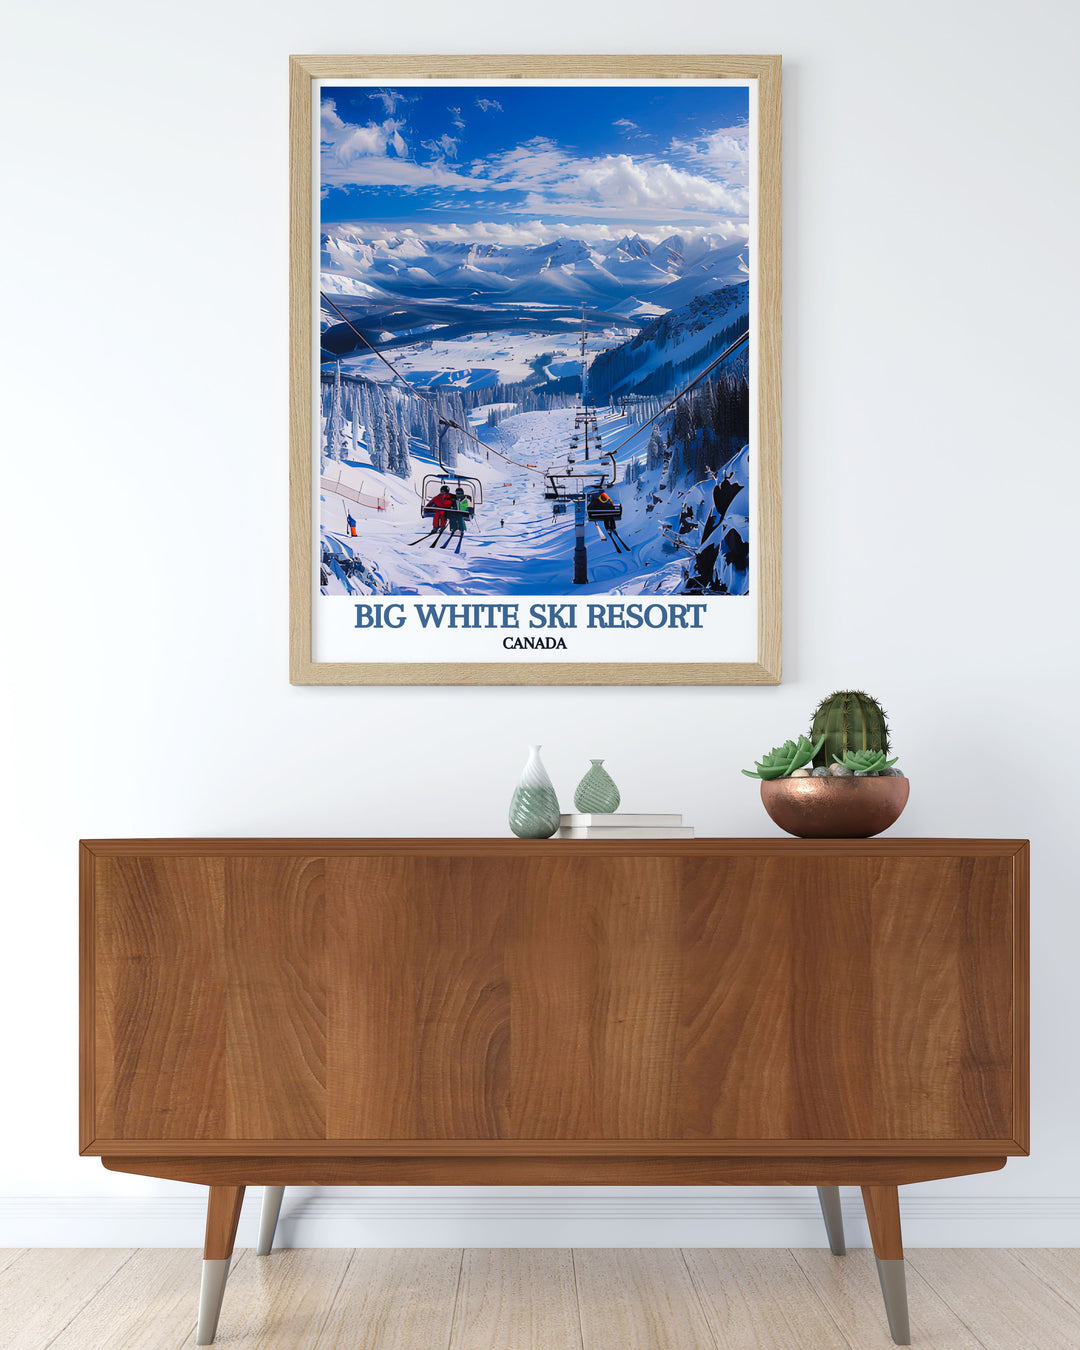 Vintage inspired poster of The Cliff Chair at Big White, blending nostalgic charm with contemporary design elements, capturing the timeless beauty of the Rockies and the thrill of Canadian ski culture.